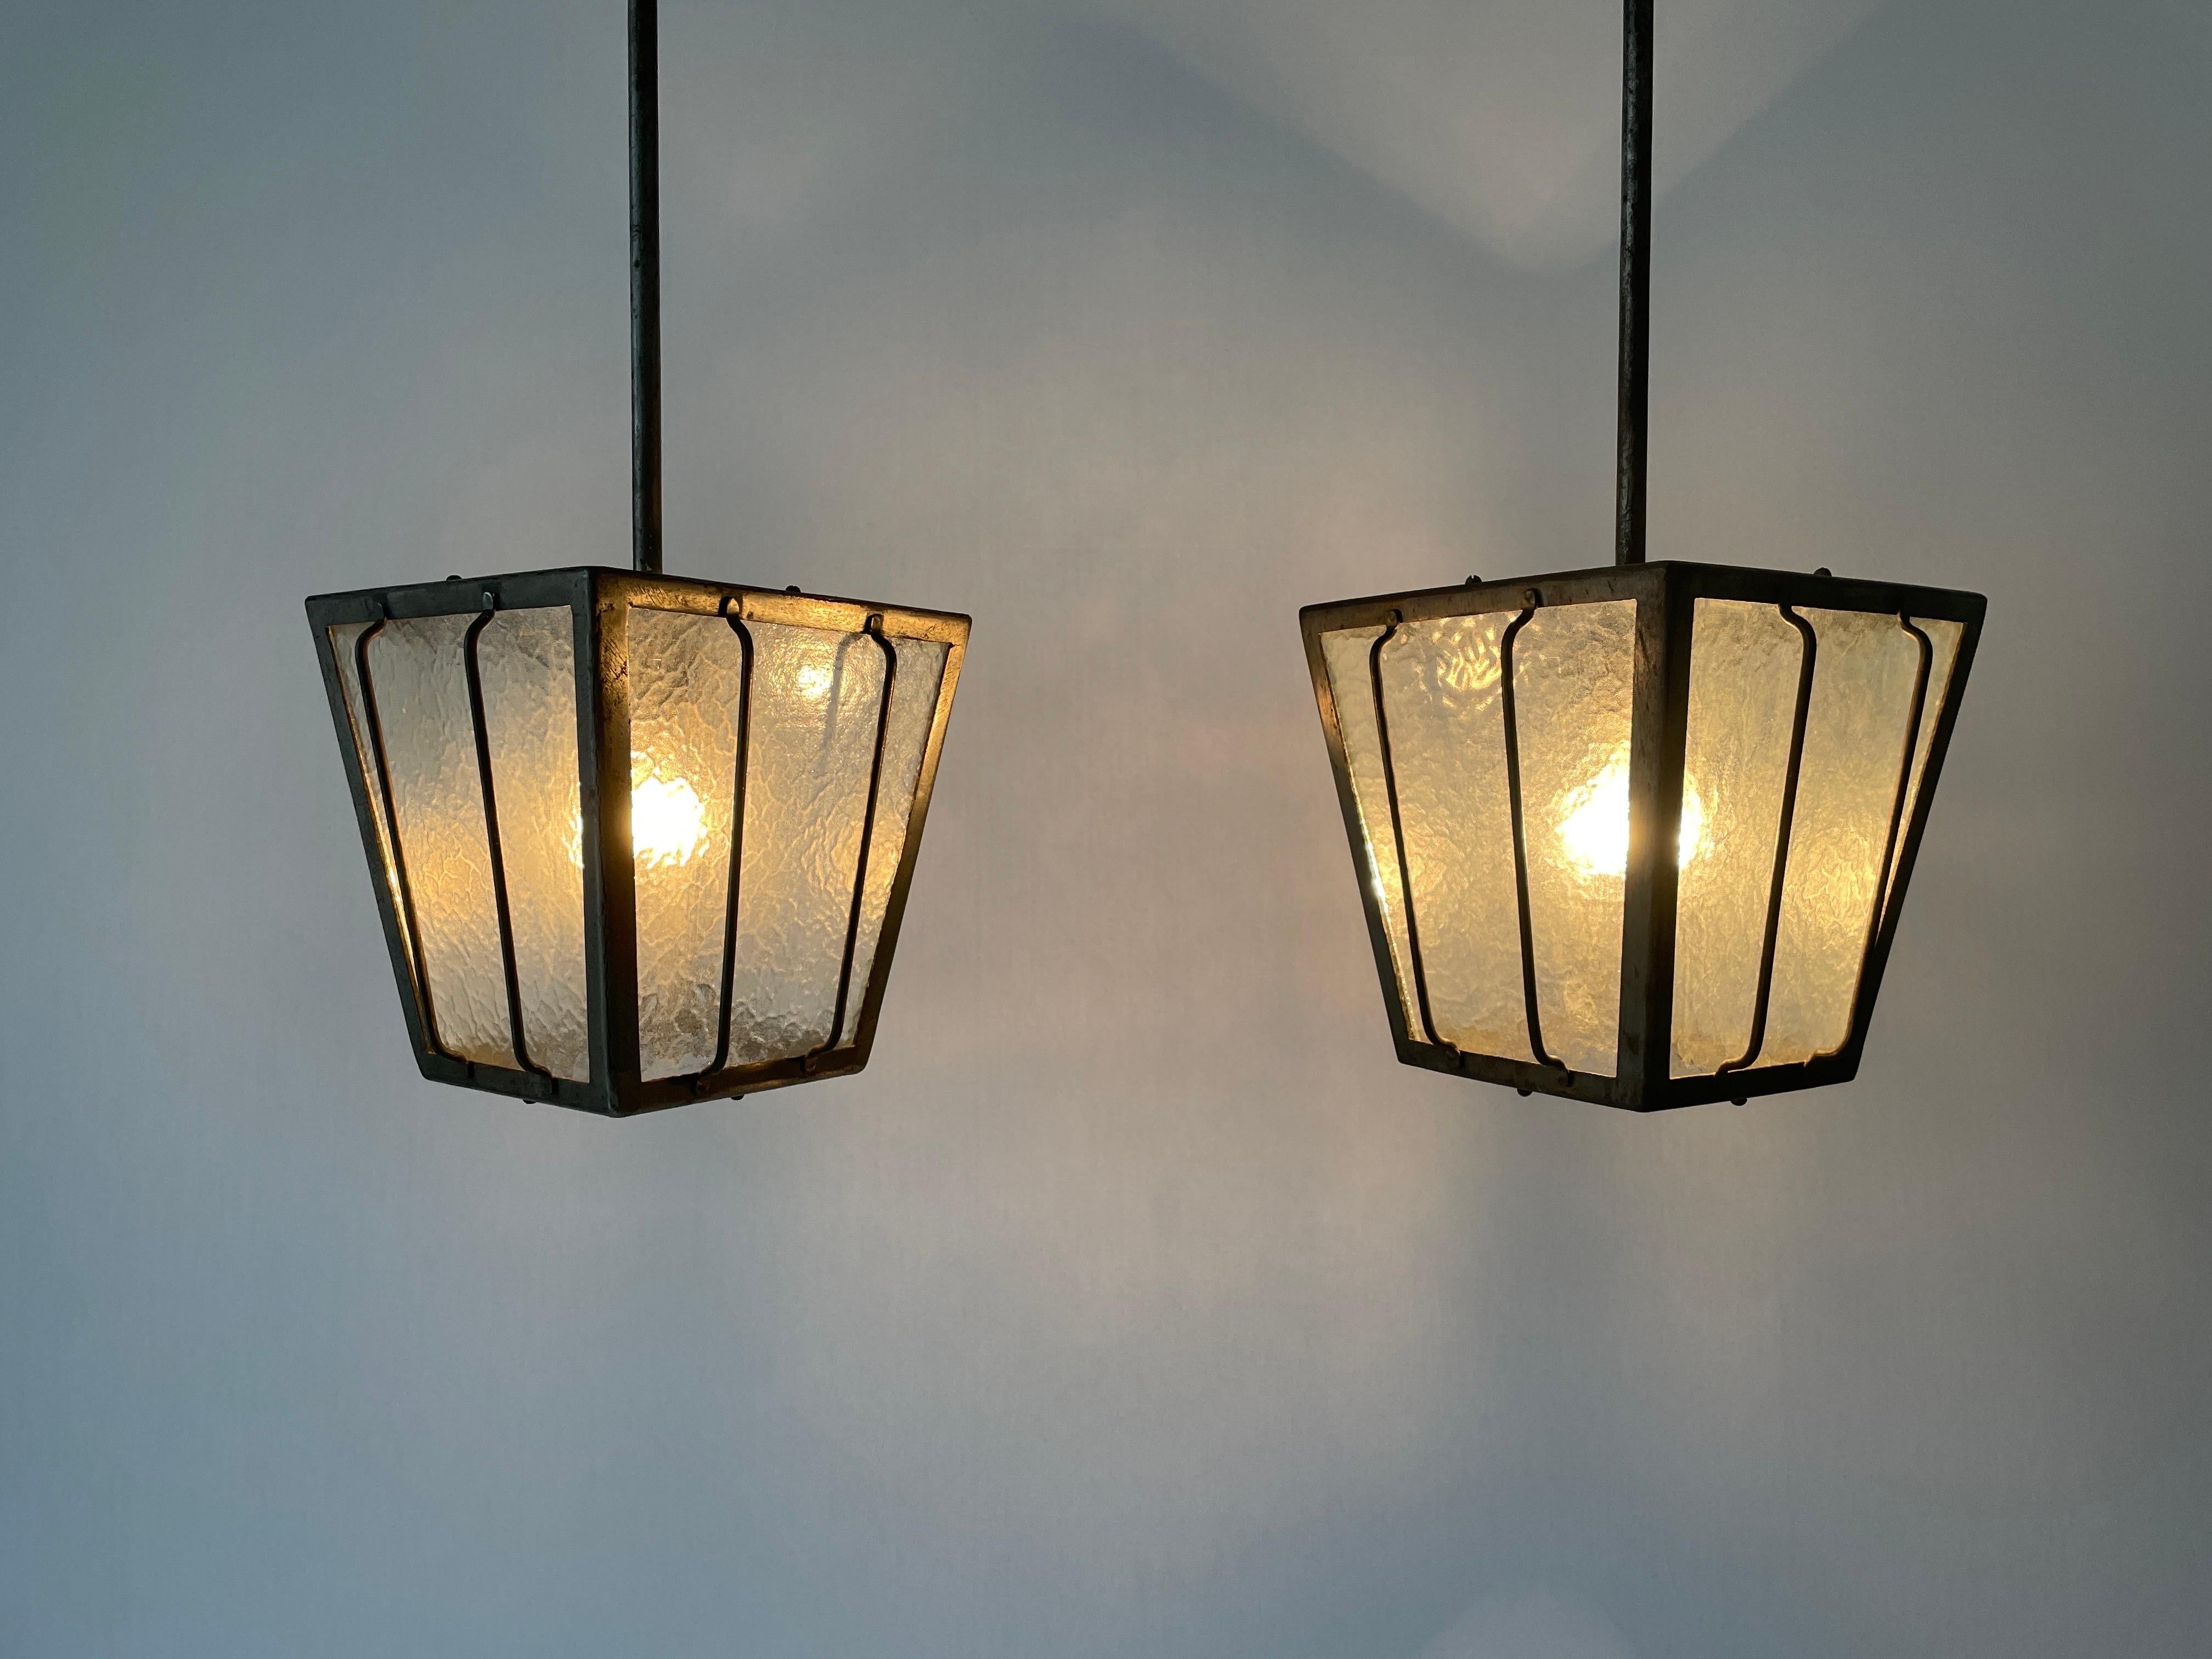 Frosted Glass Milano Apartment Pair of Ceiling Lamps, 1950s, Italy For Sale 2